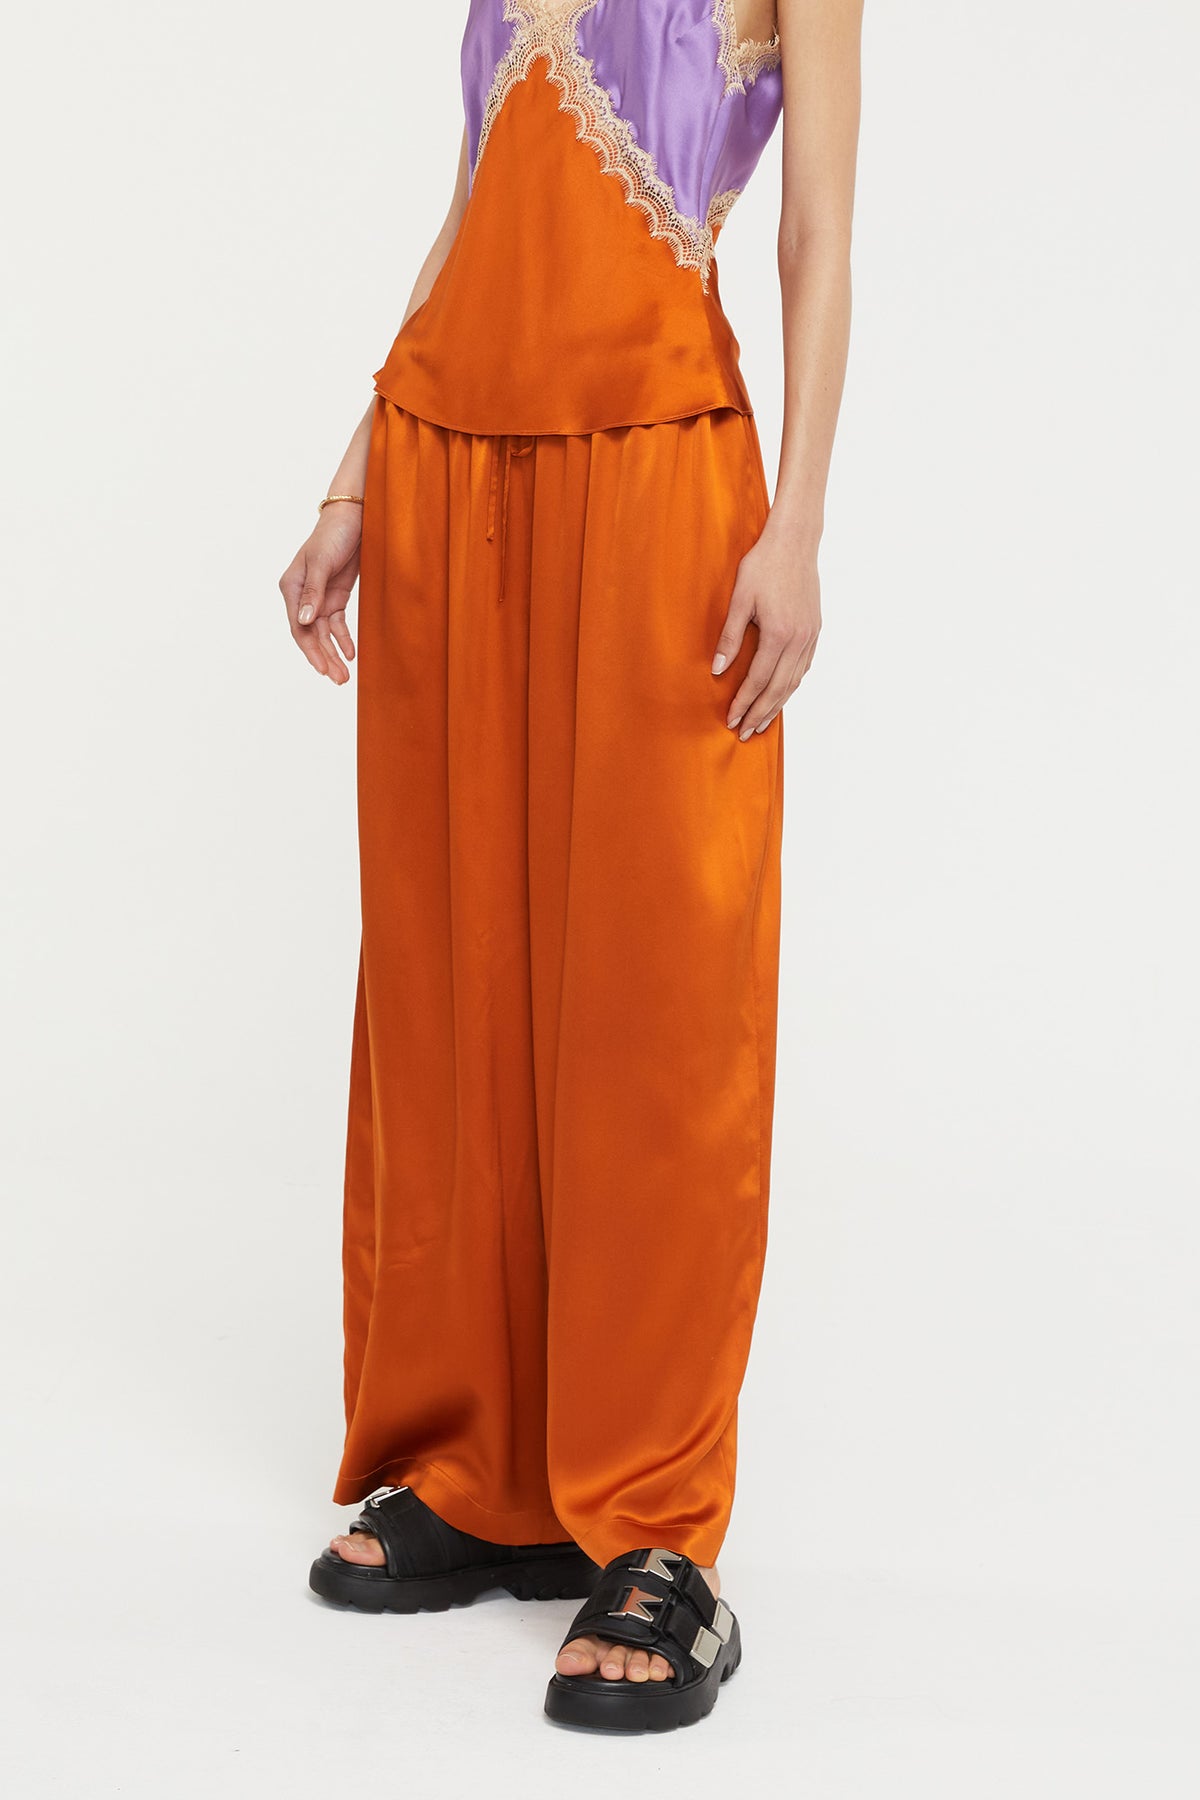 GINIA Amelia Pant in Sunset 19 Momme Silk